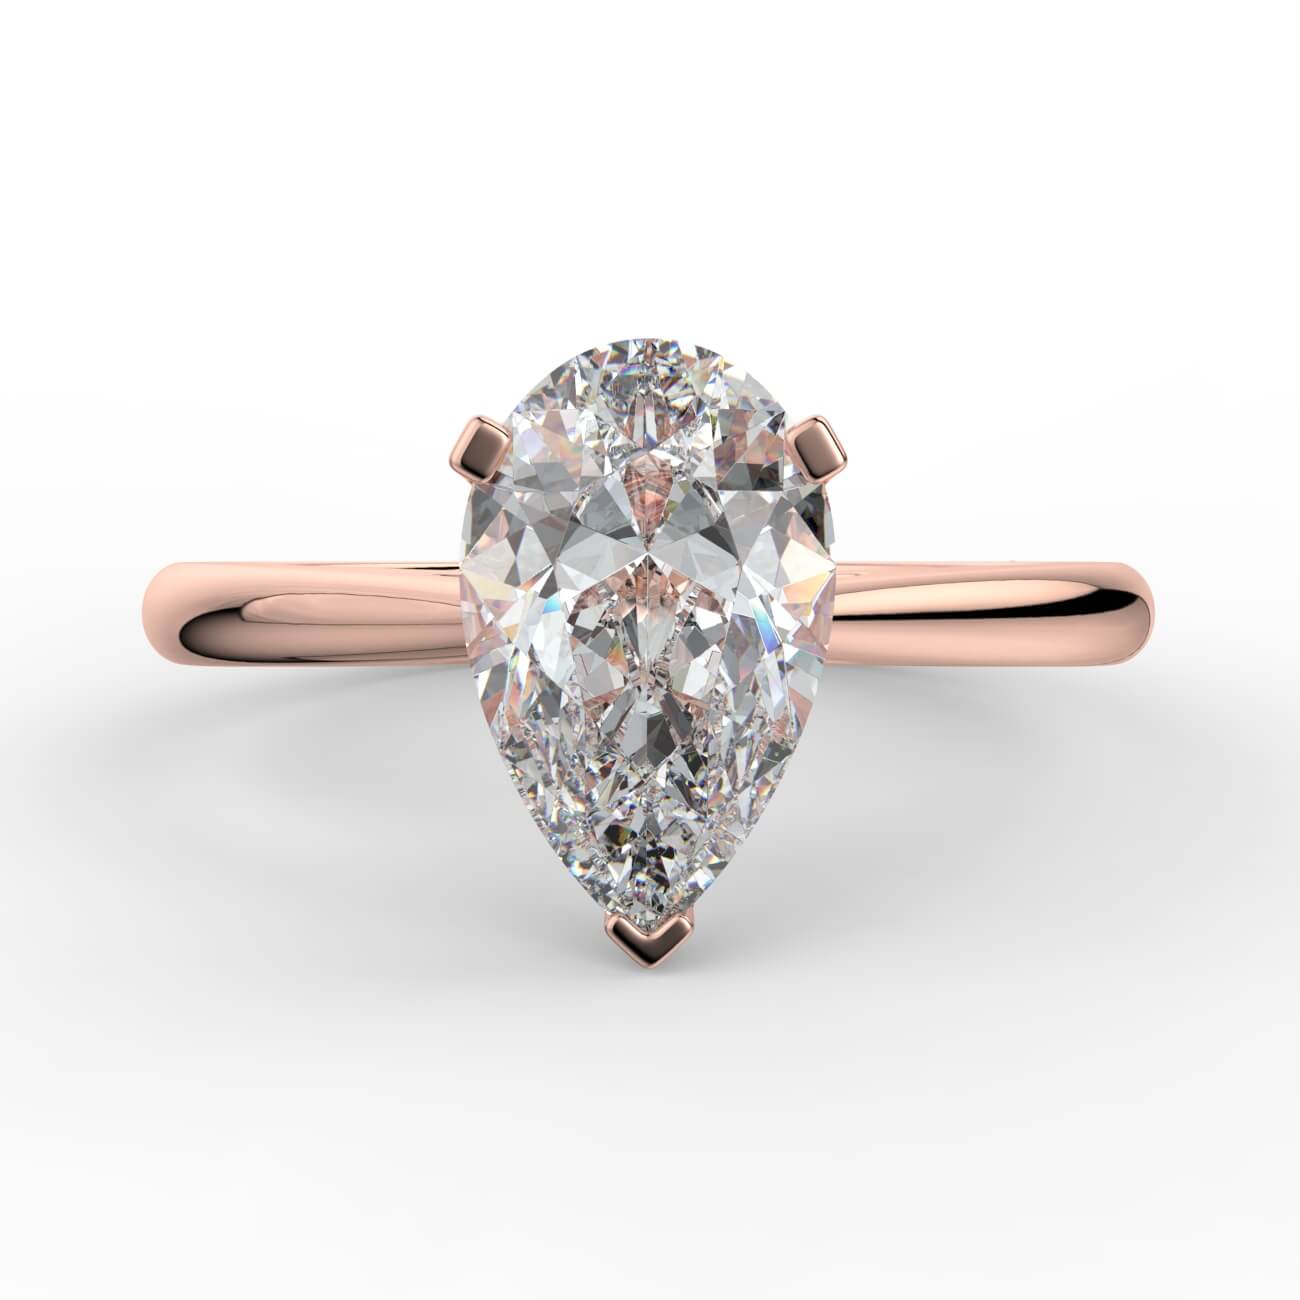 Pear cut diamond cathedral engagement ring in rose gold – Australian Diamond Network